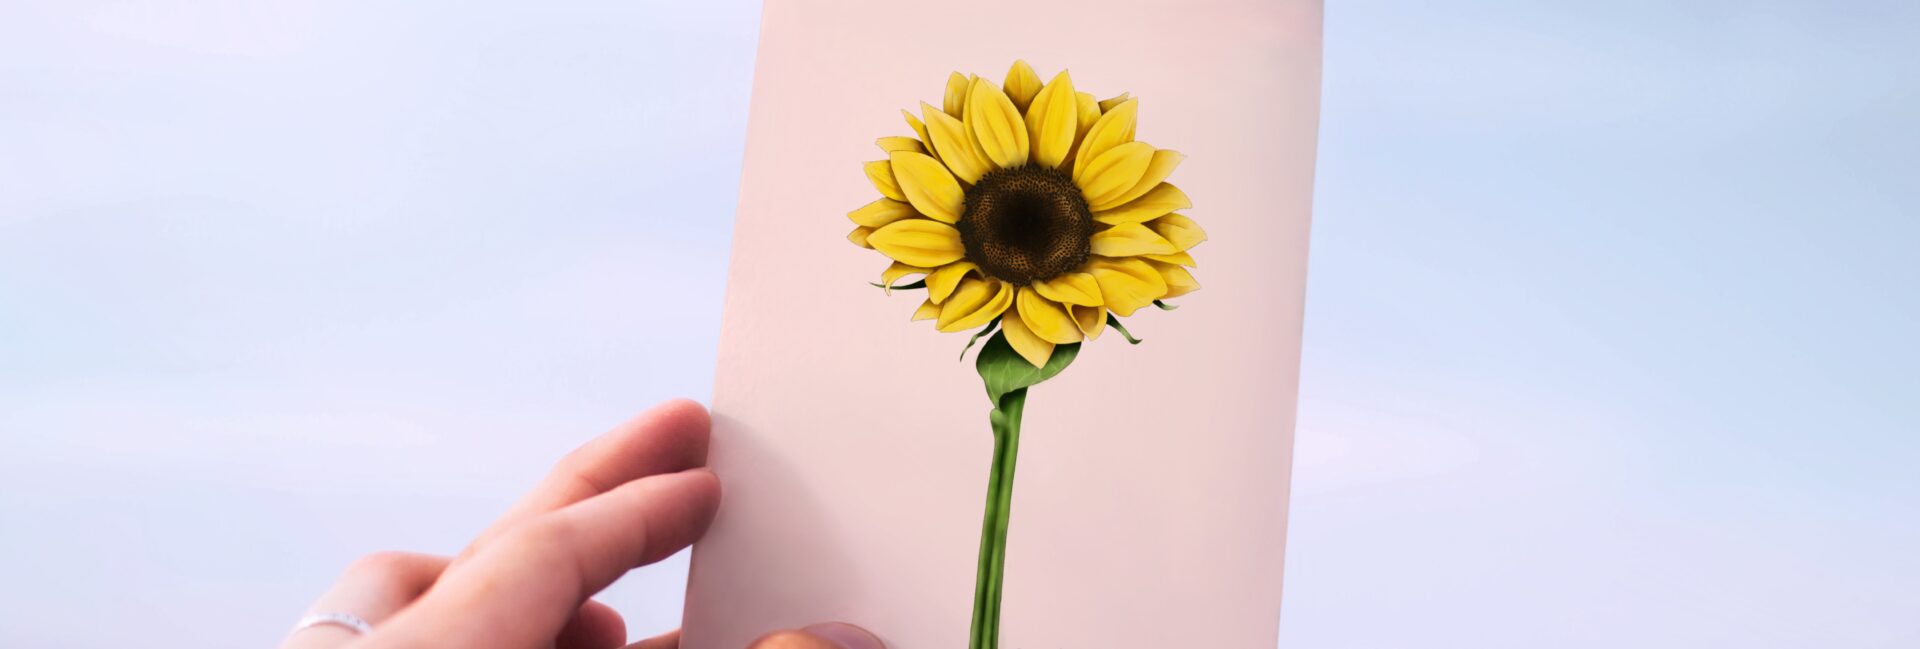 Sunflowers are the perfect thing to cheer someone up